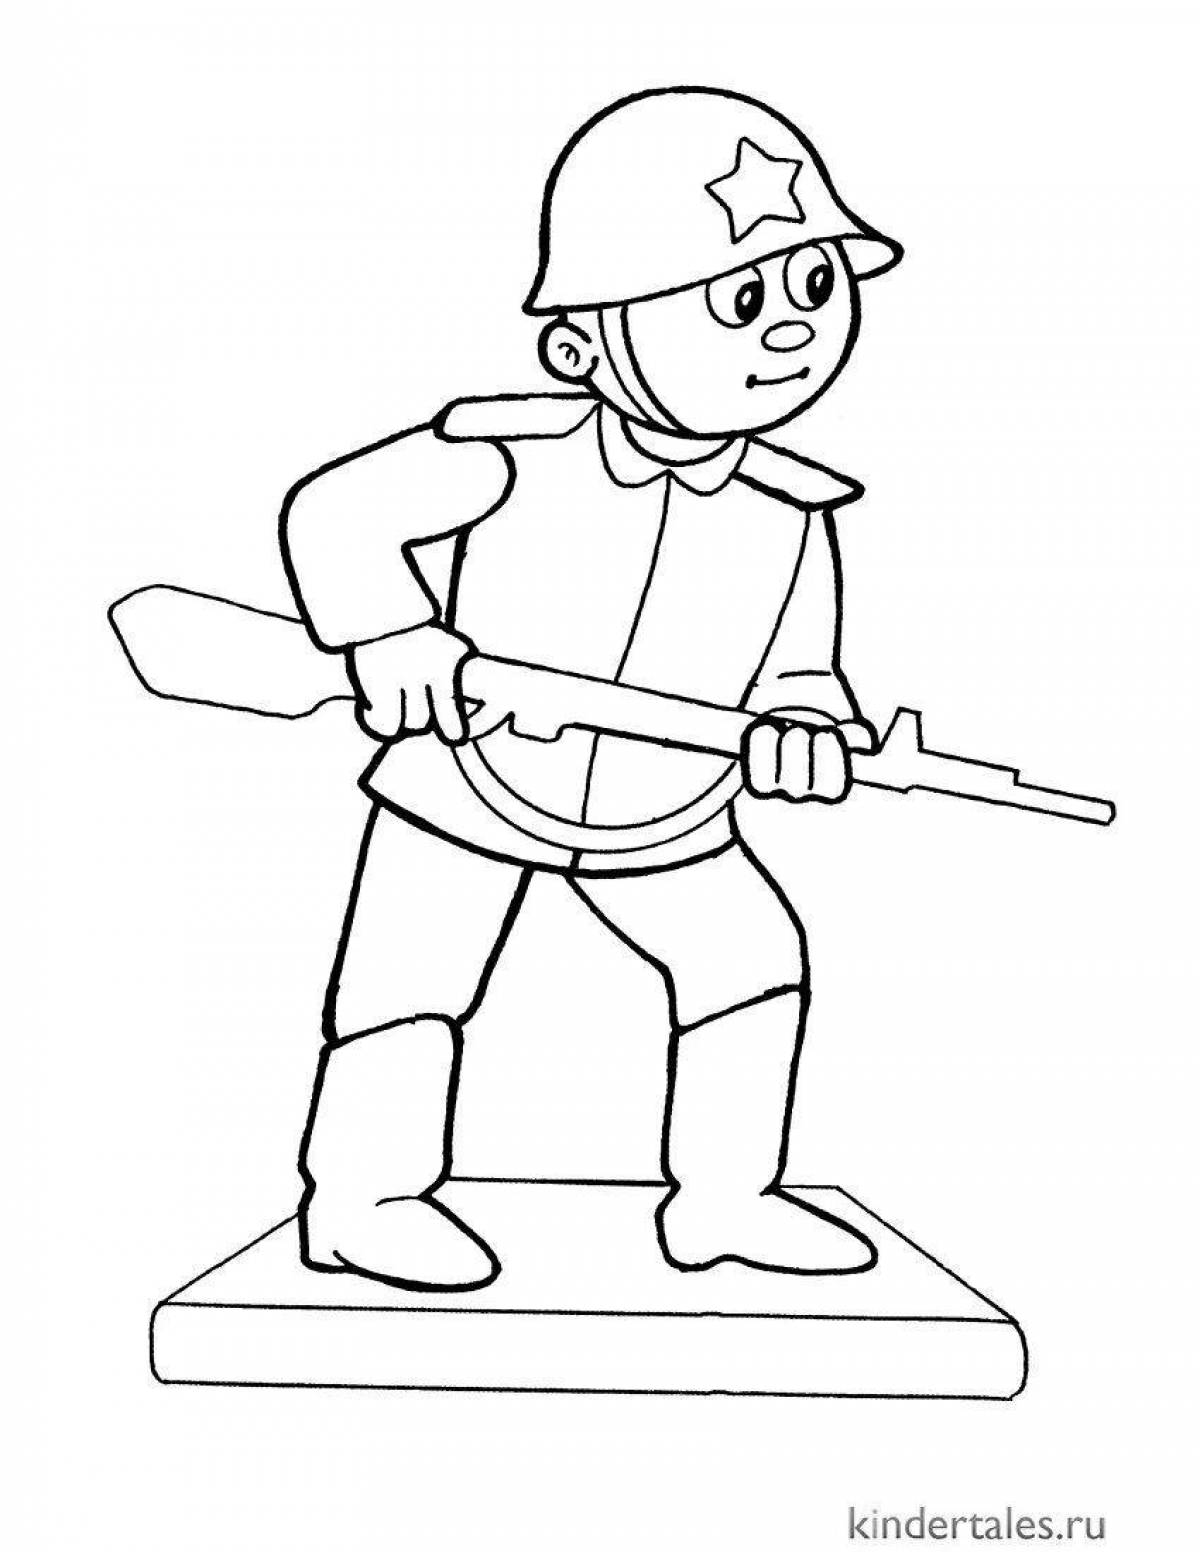 Soldier fun coloring for kids